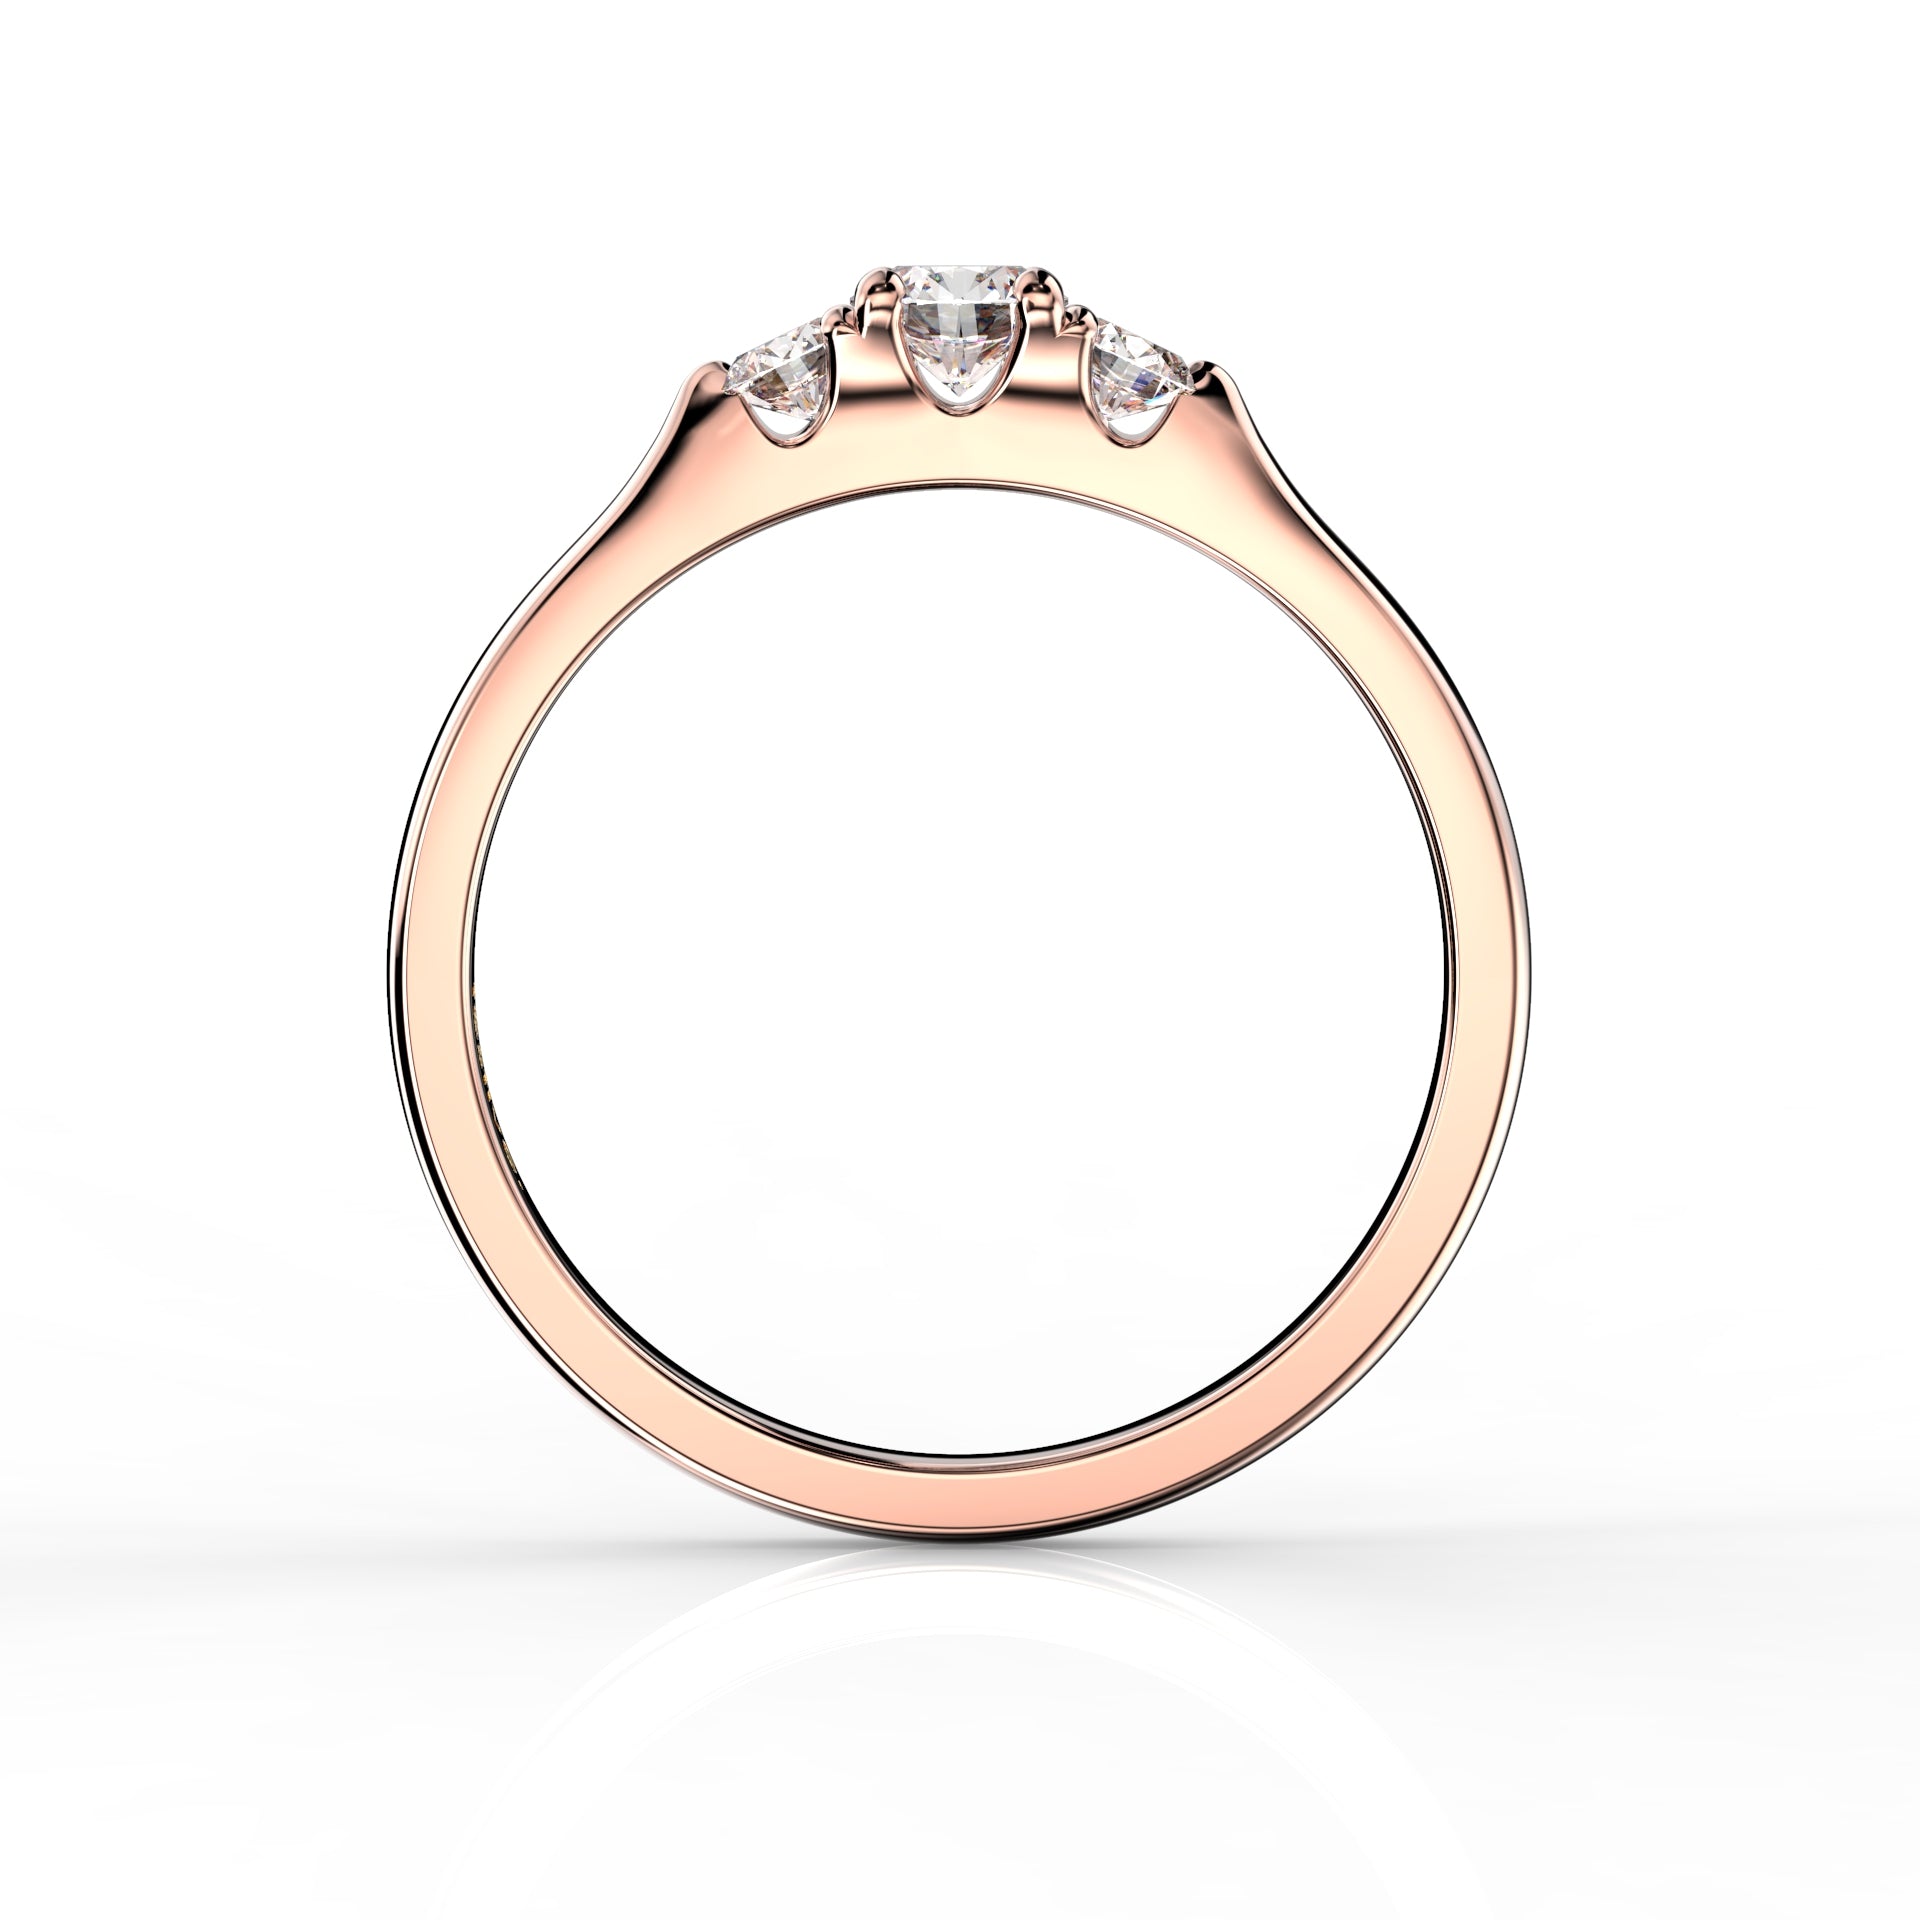 Diamond Ring Janette 0.40 ct - OUTLET